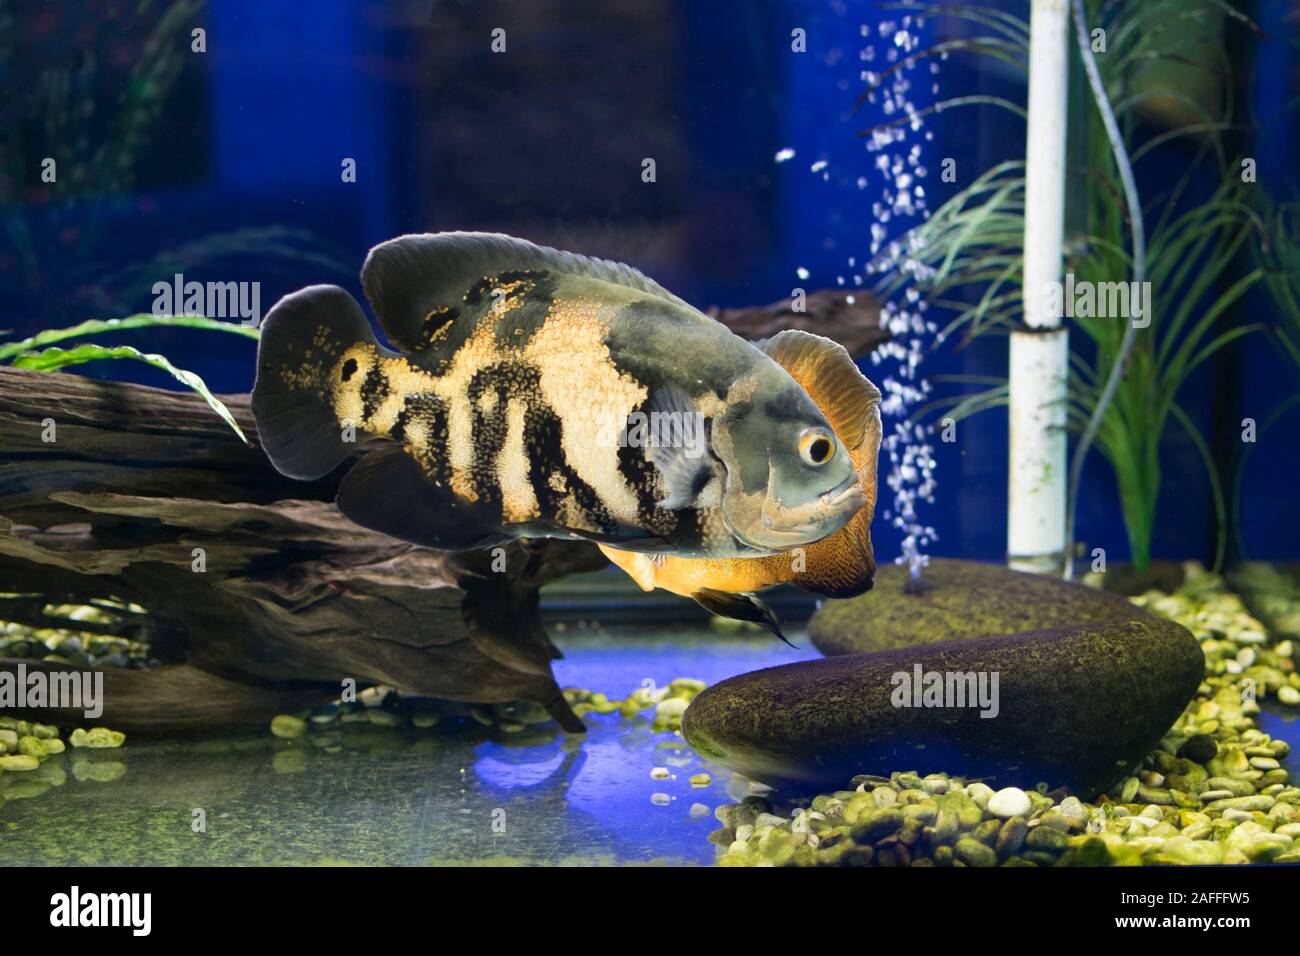 The oscar (tiger oscar, velvet cichlid, and marble cichlid) (Astronotus ocellatus) is a species of fish from the cichlid family in tropical South Amer Stock Photo